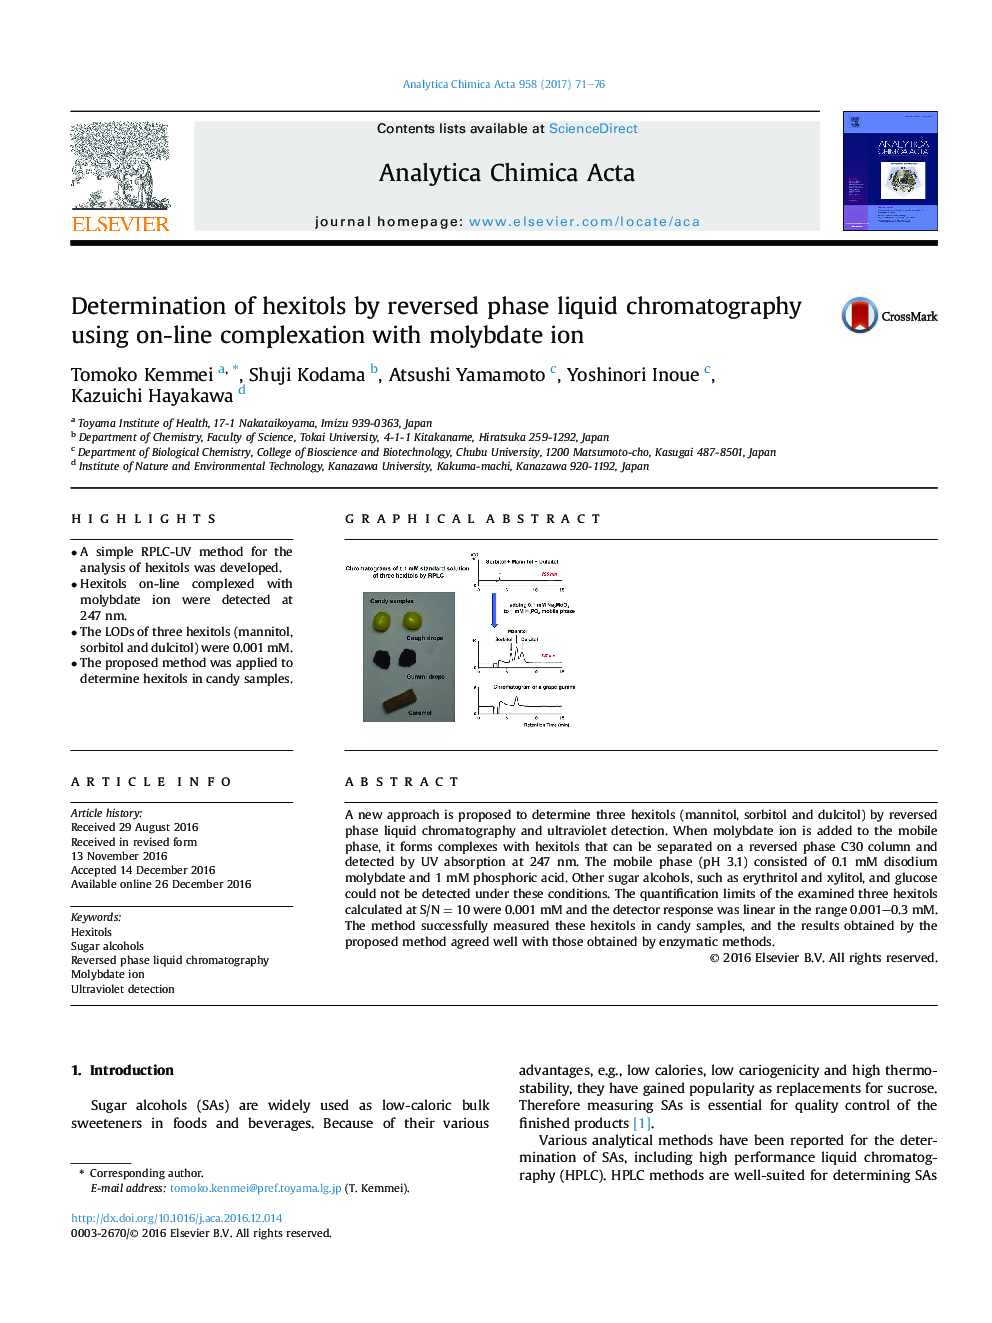 Determination of hexitols by reversed phase liquid chromatography using on-line complexation with molybdate ion